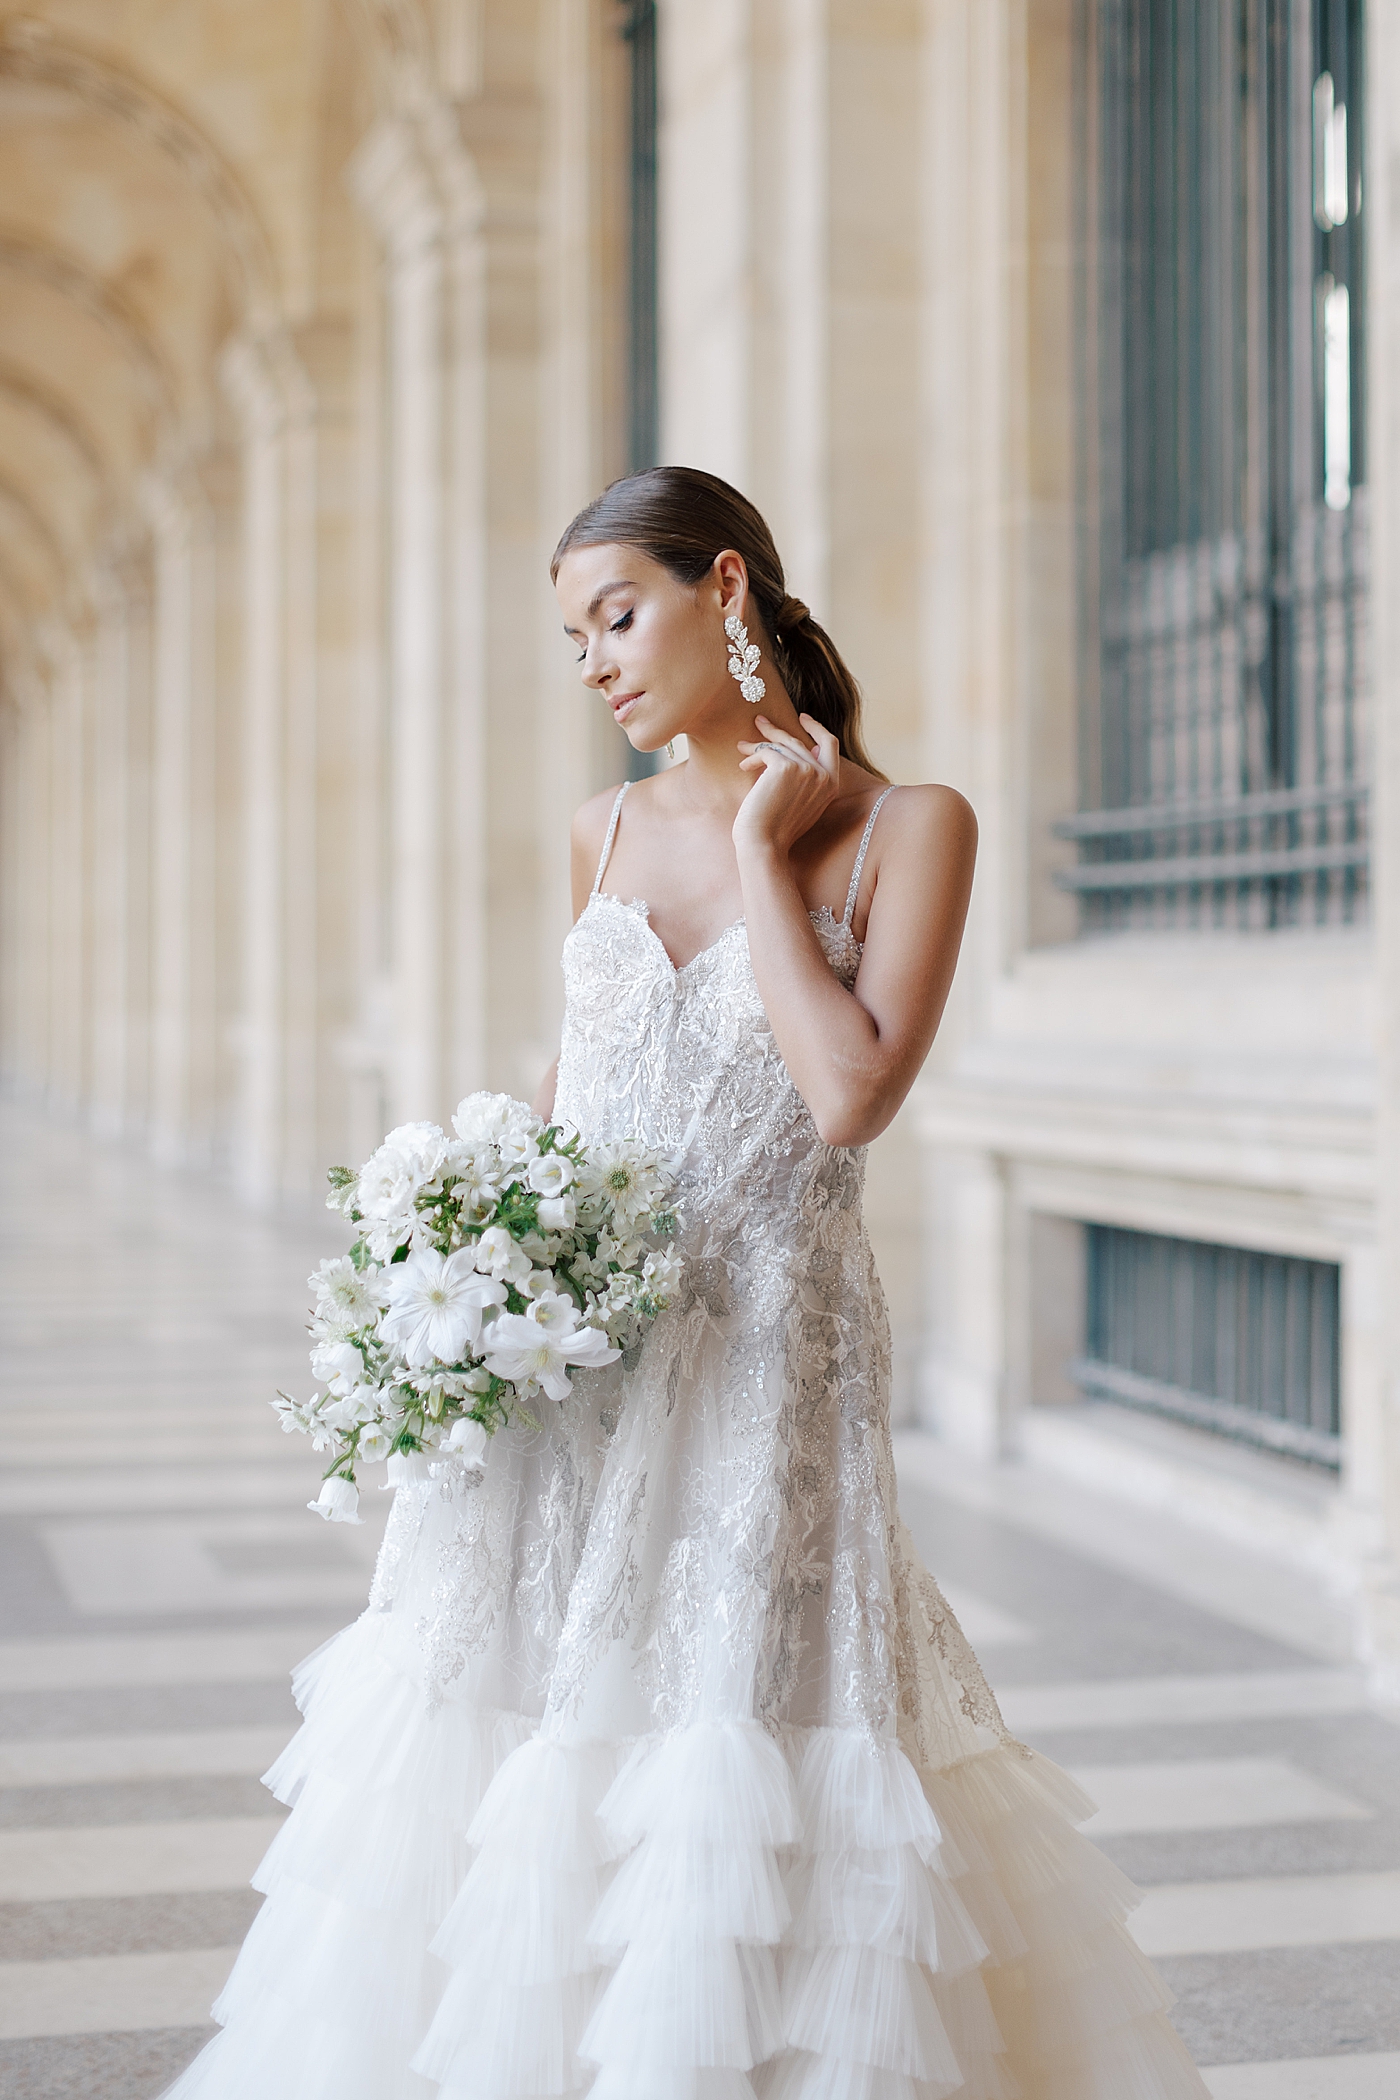 Bride standing in the outside hallway of the Louvre with a bouquet, holding her earring | Image by Hope Helmuth Photography